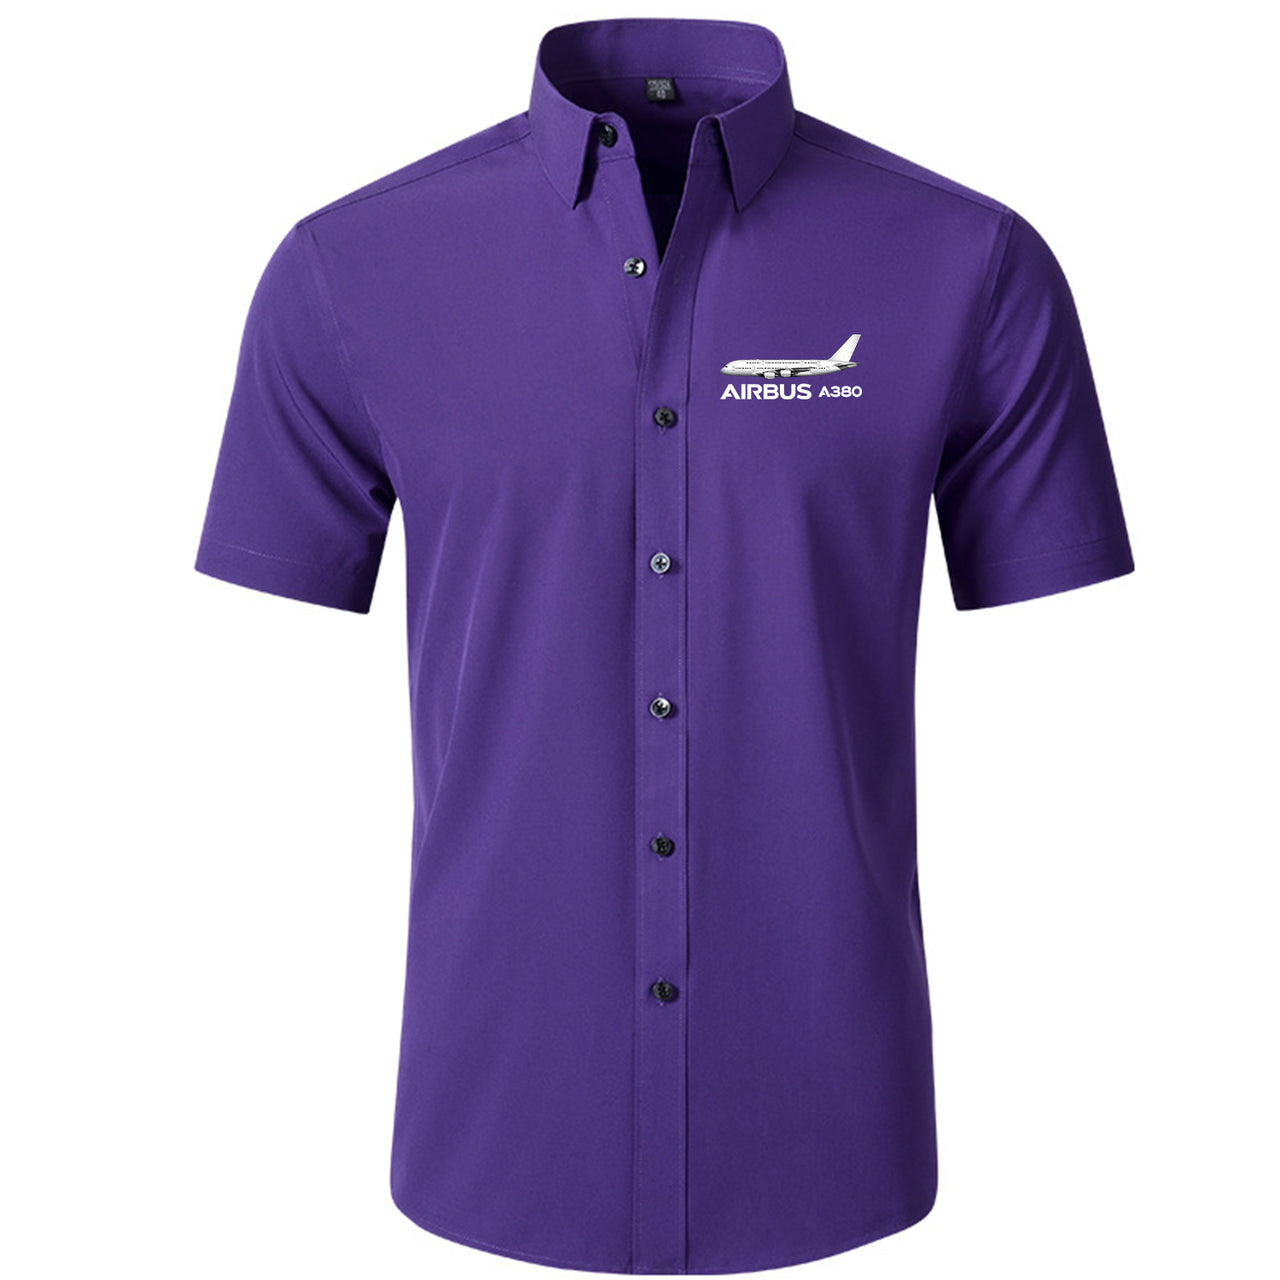 The Airbus A380 Designed Short Sleeve Shirts